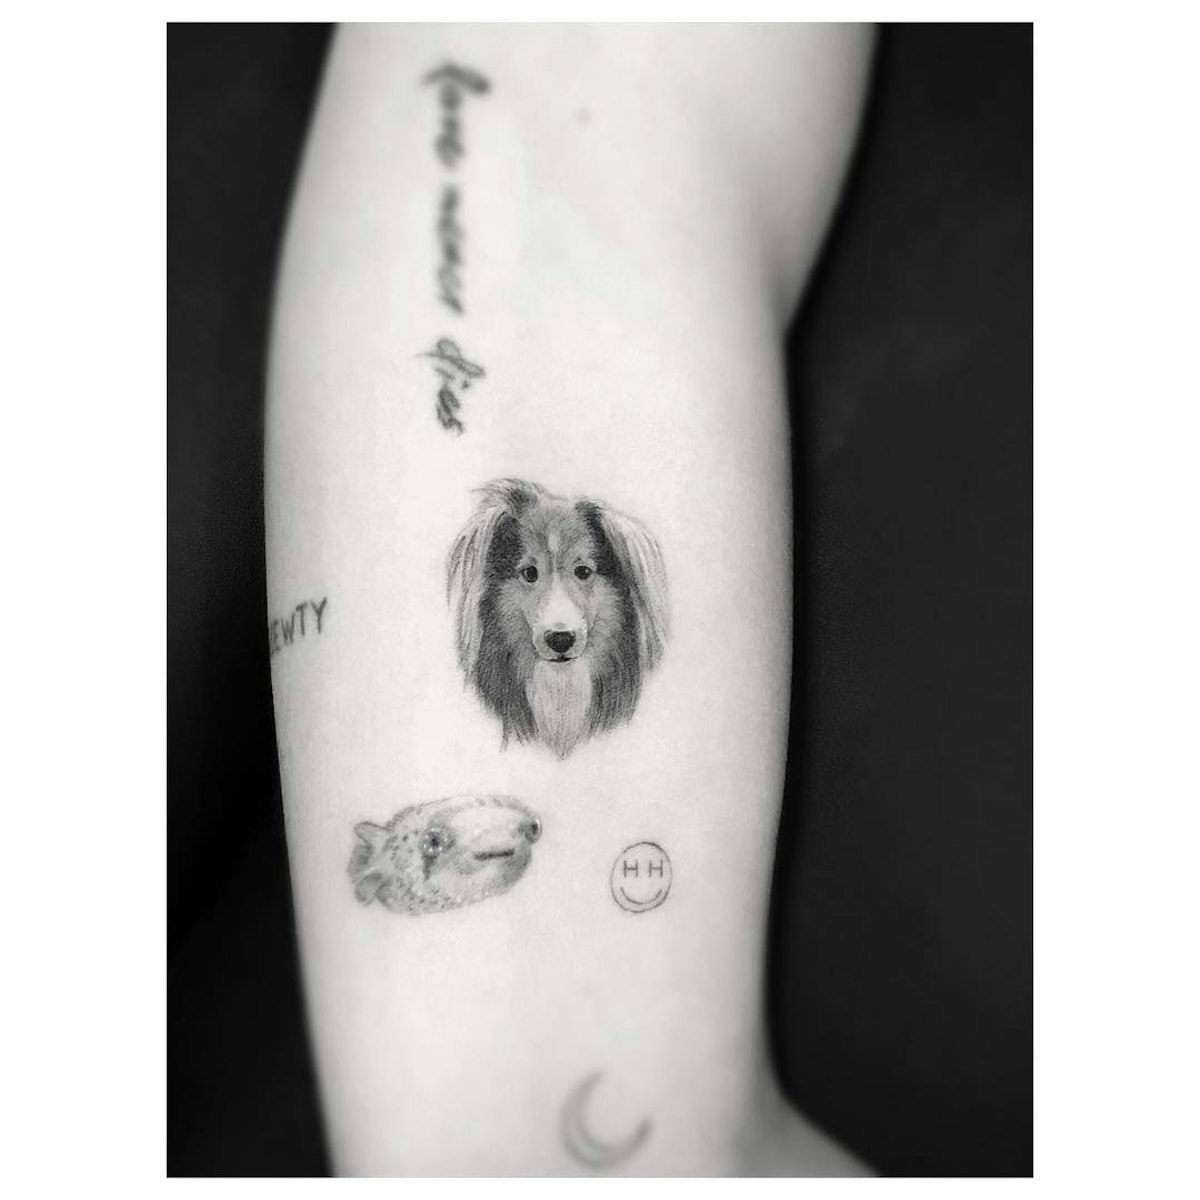 Miley Cyrus' tattoo is of her dog Emu. 